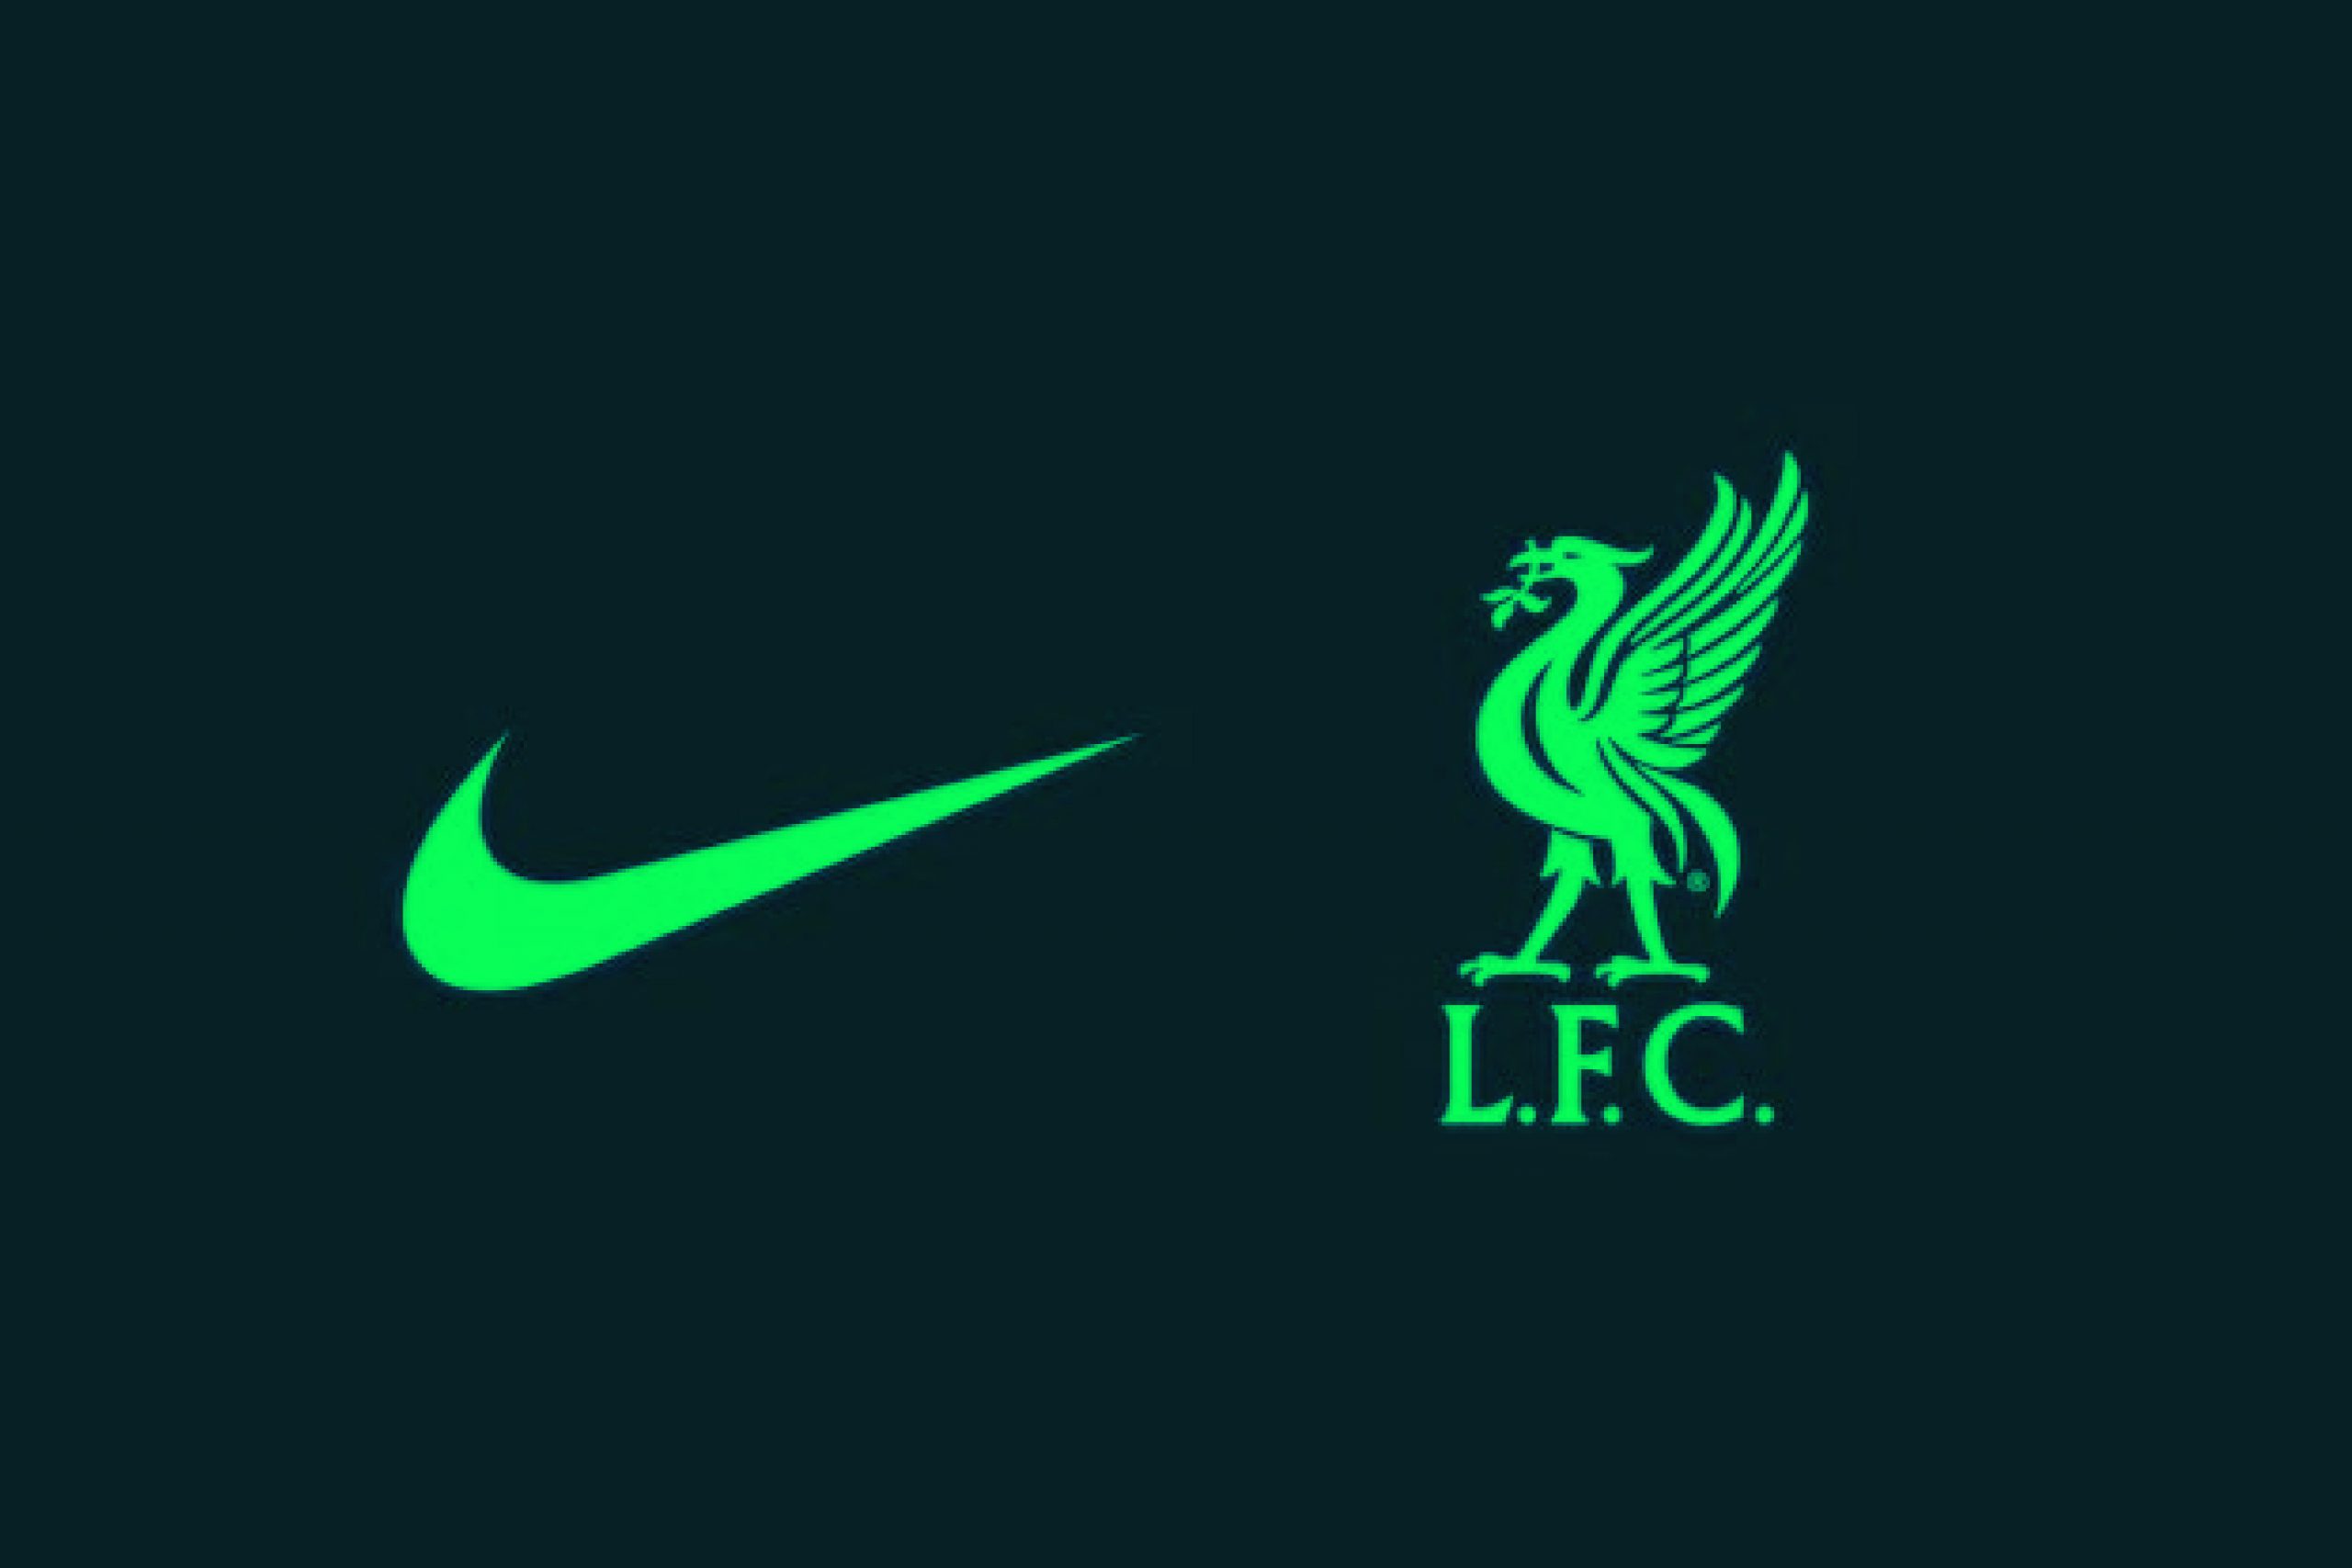 New photo gives a sneak peek at the variety of kits Liverpool players will don next season